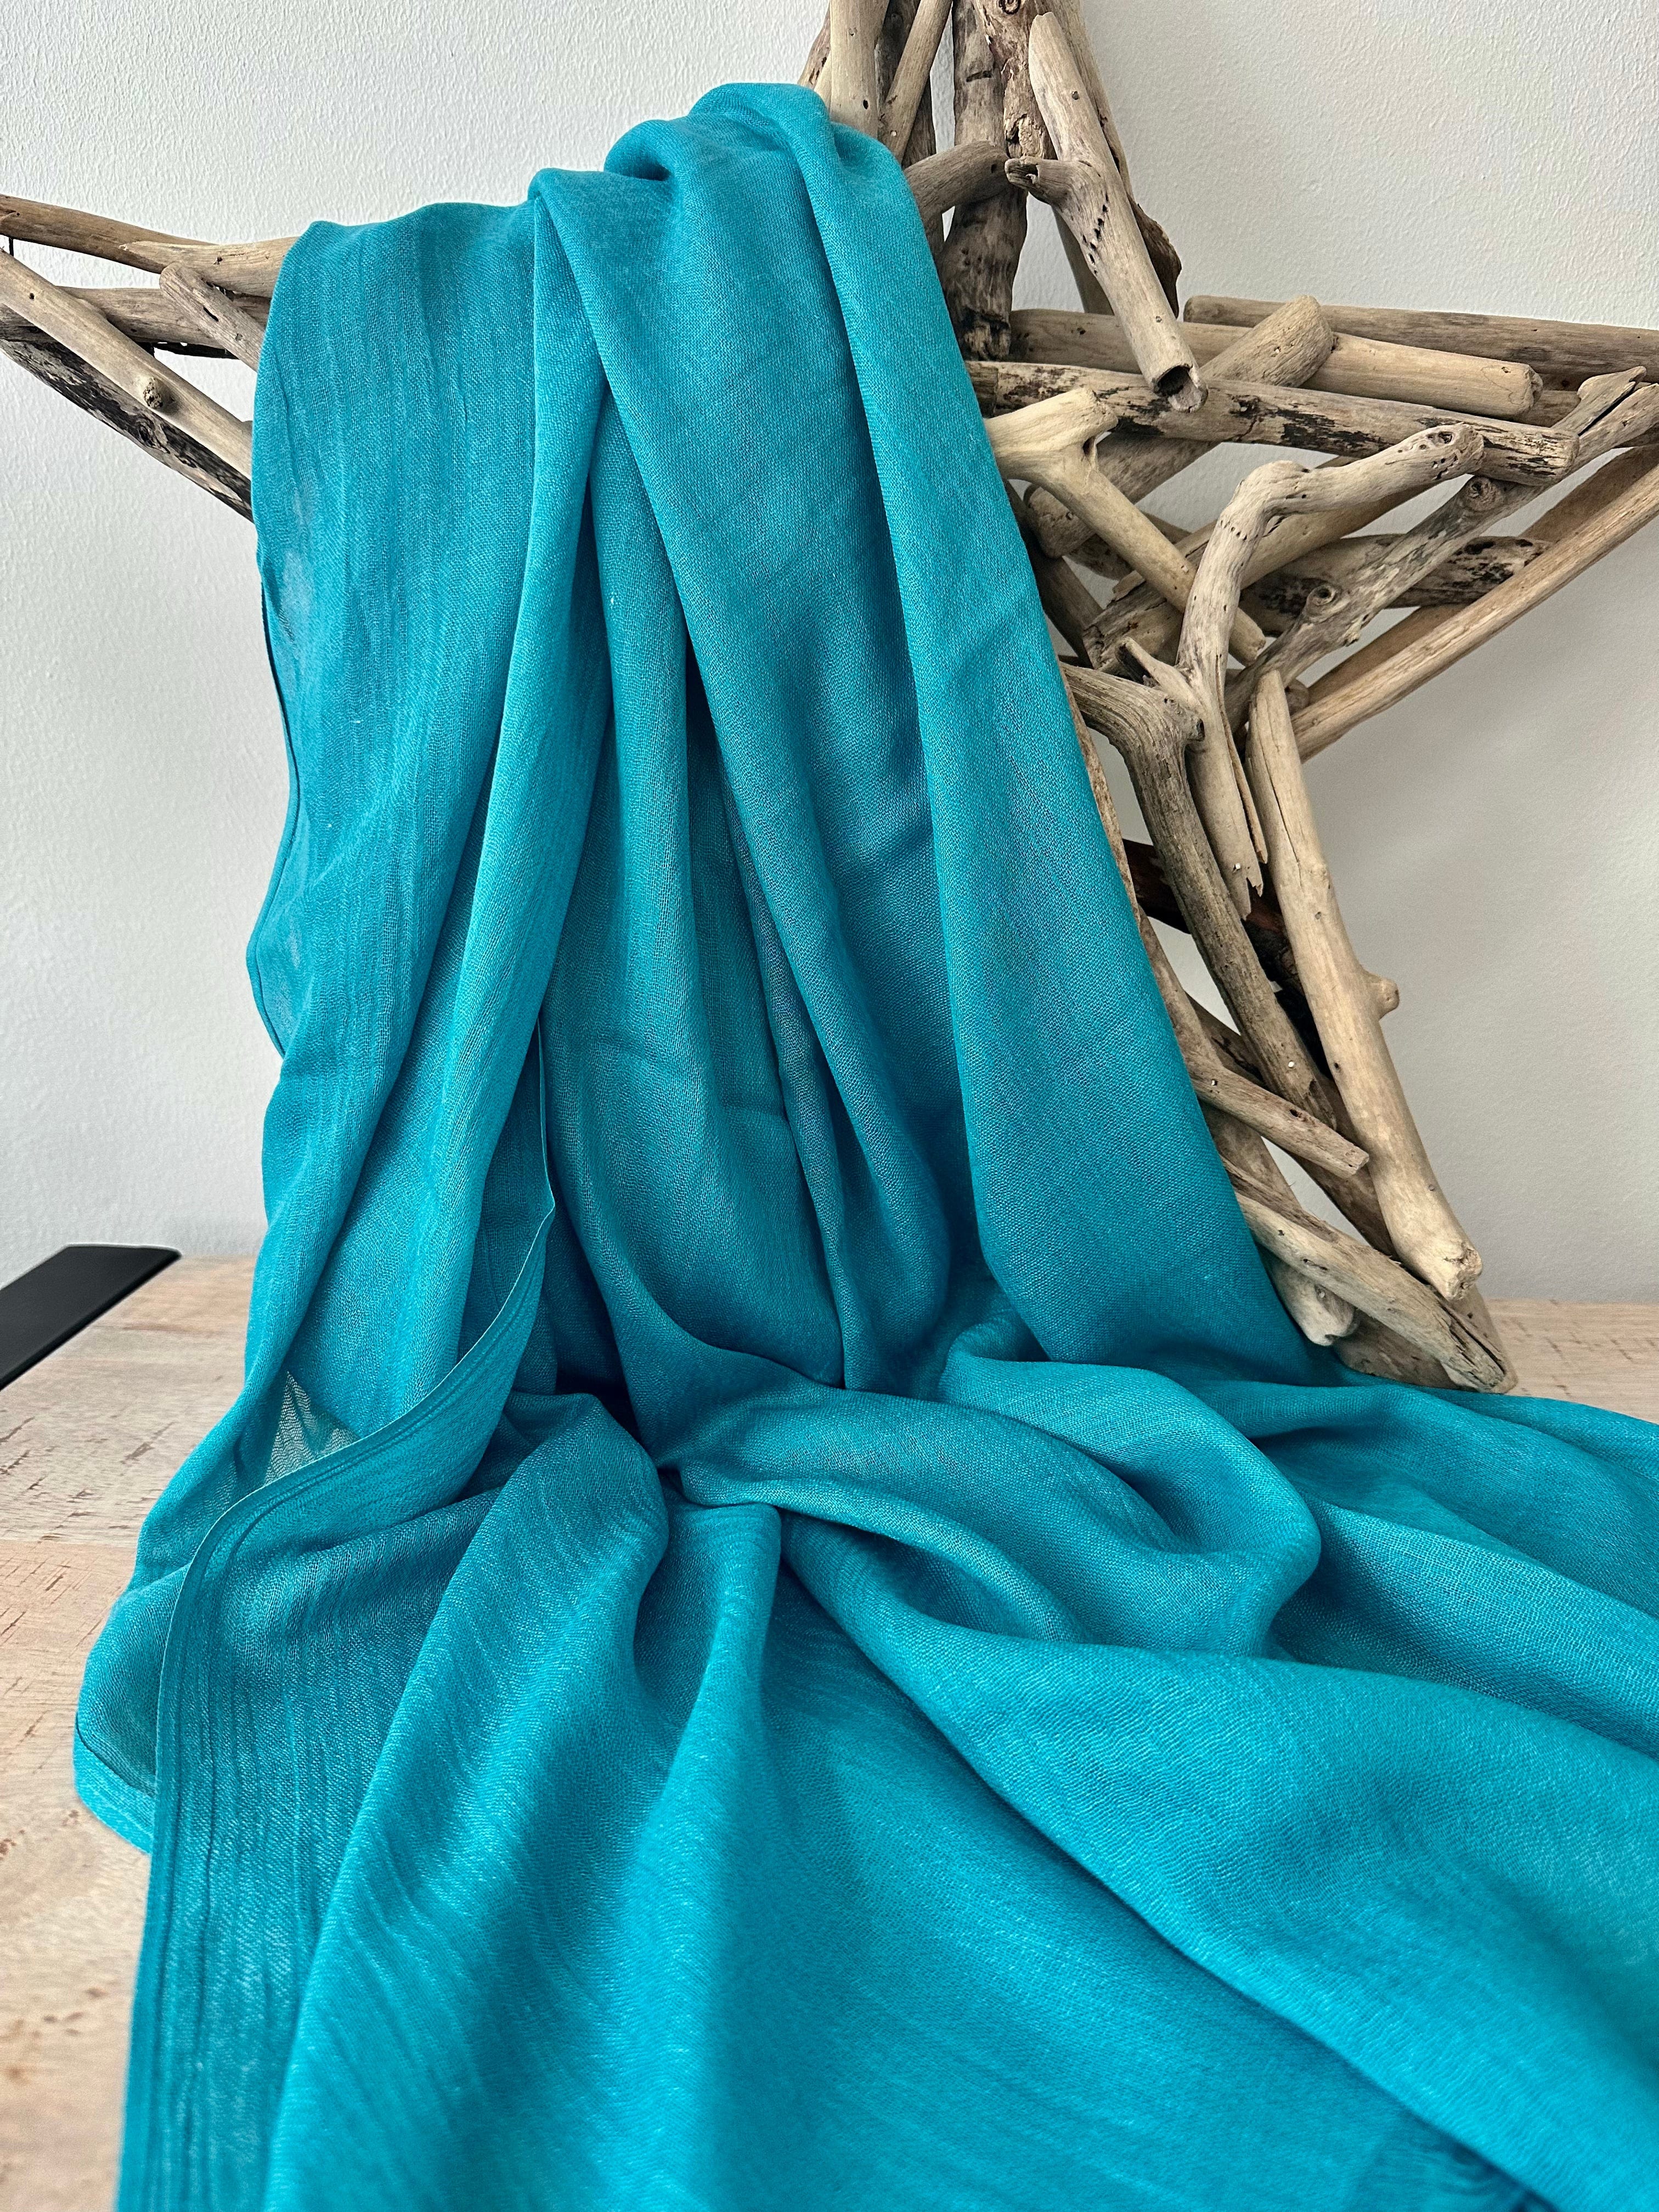 lusciousscarves Teal Plain Light Weight Cotton Blend Summer Scarf , Wrap, Shawl 26 Colours Available